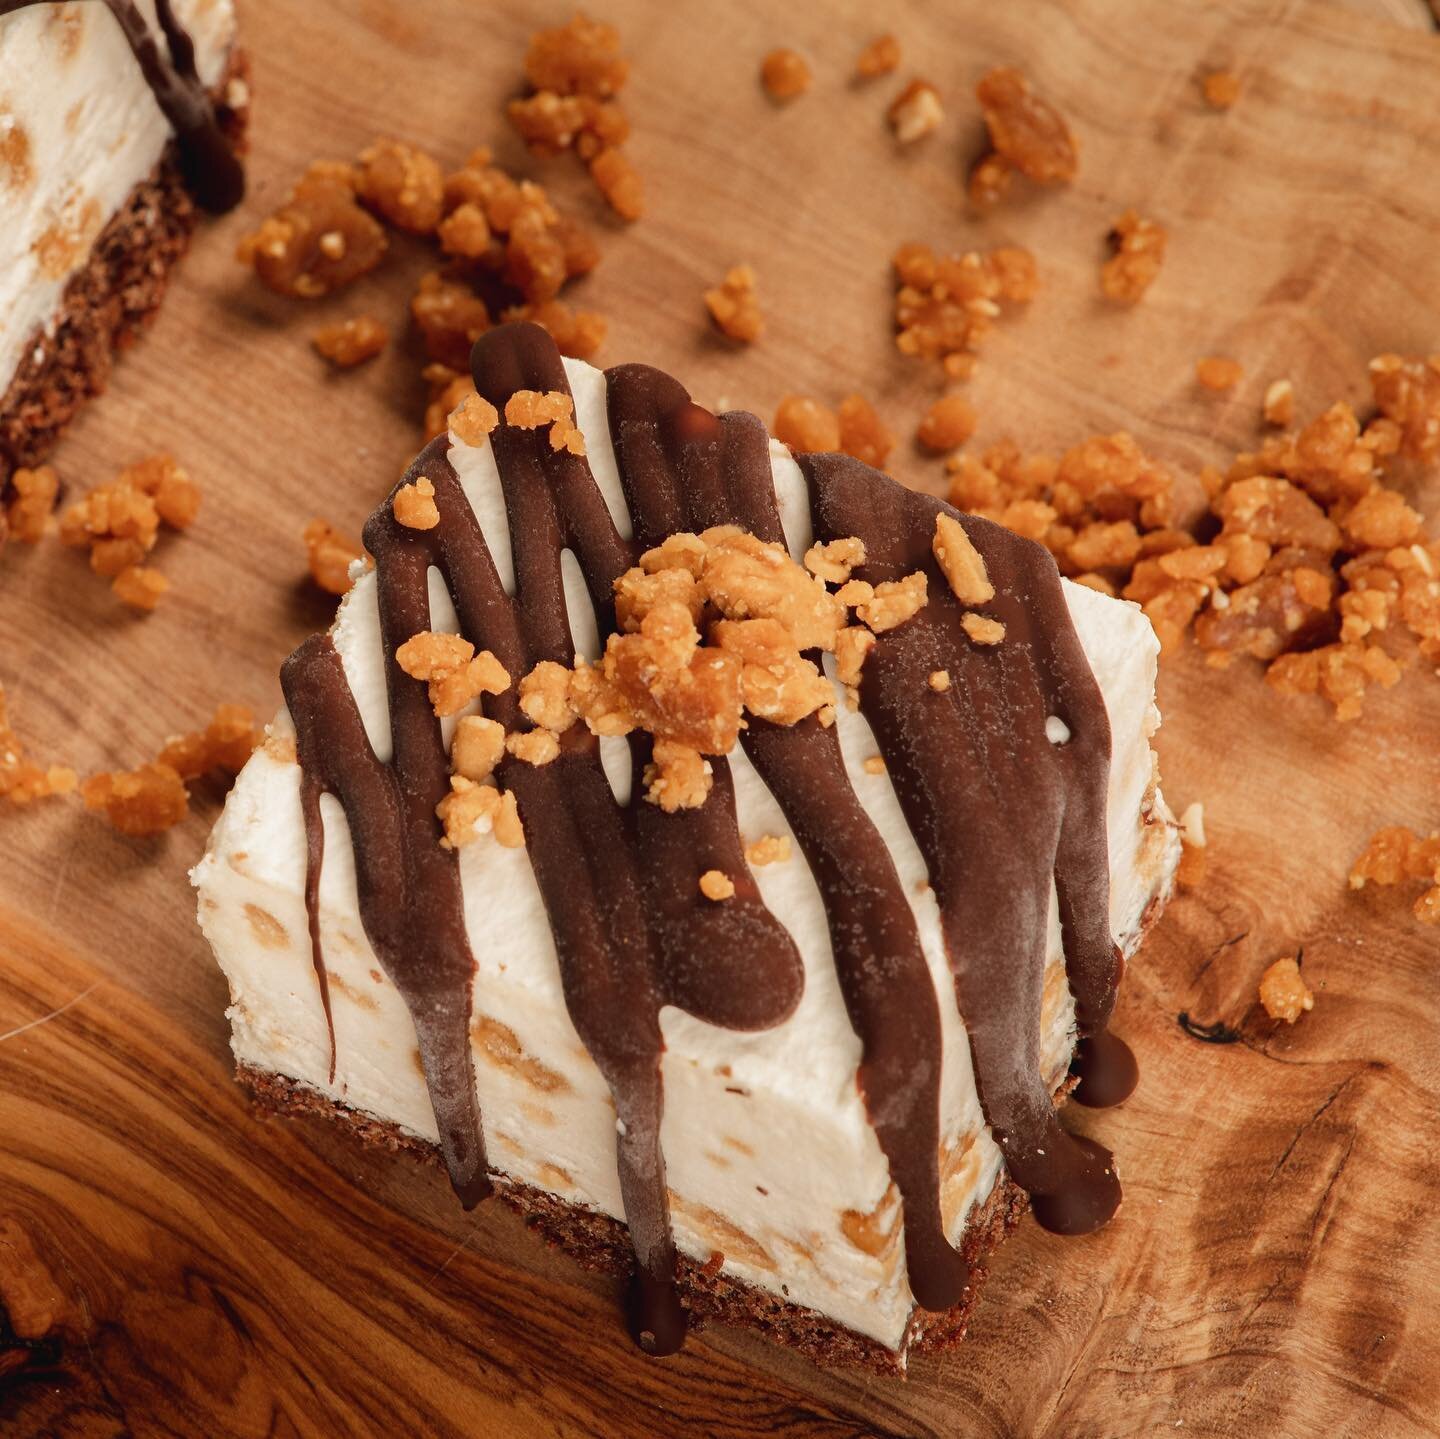 We're so excited to be participating in this years @brewerythebeast on September 12 at Starlight Stadium! All locally sourced goodness under one roof! 
So what ice cream feature would you like us to bring? 
Our classic Salted Toffee bar?
Perhaps our 